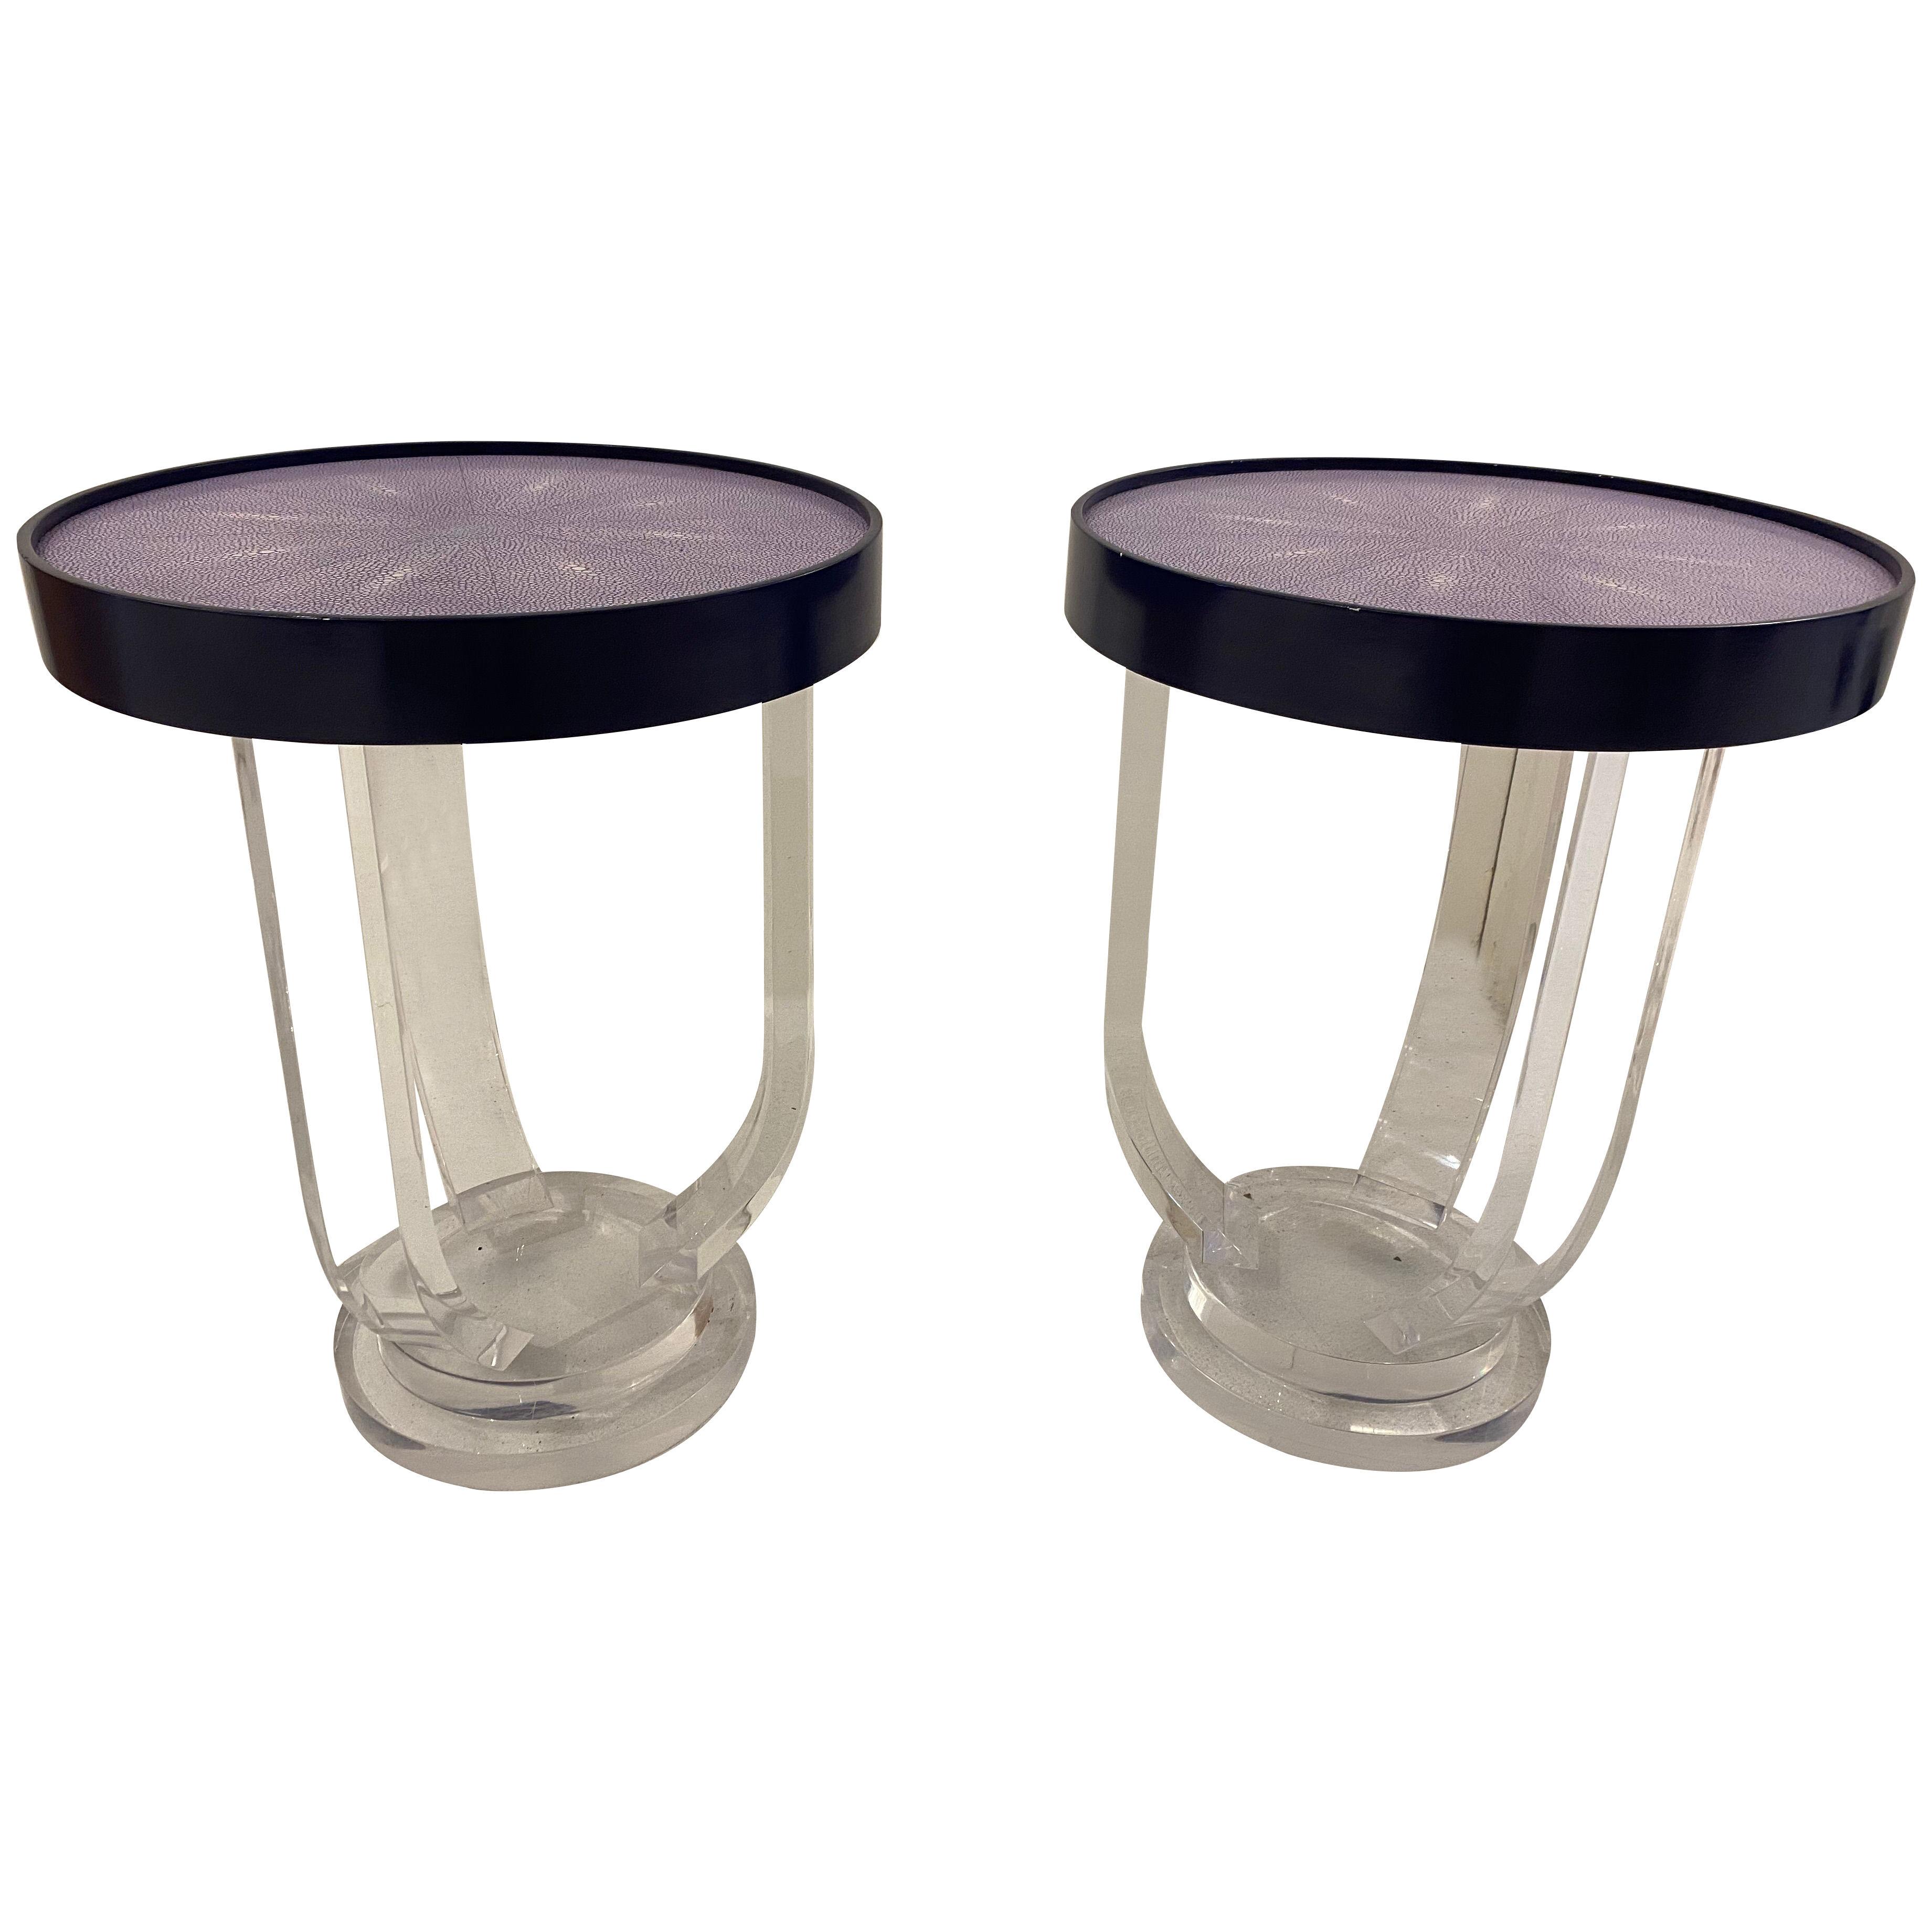 Pair of Lucite and Faux Shagreen Side Tables